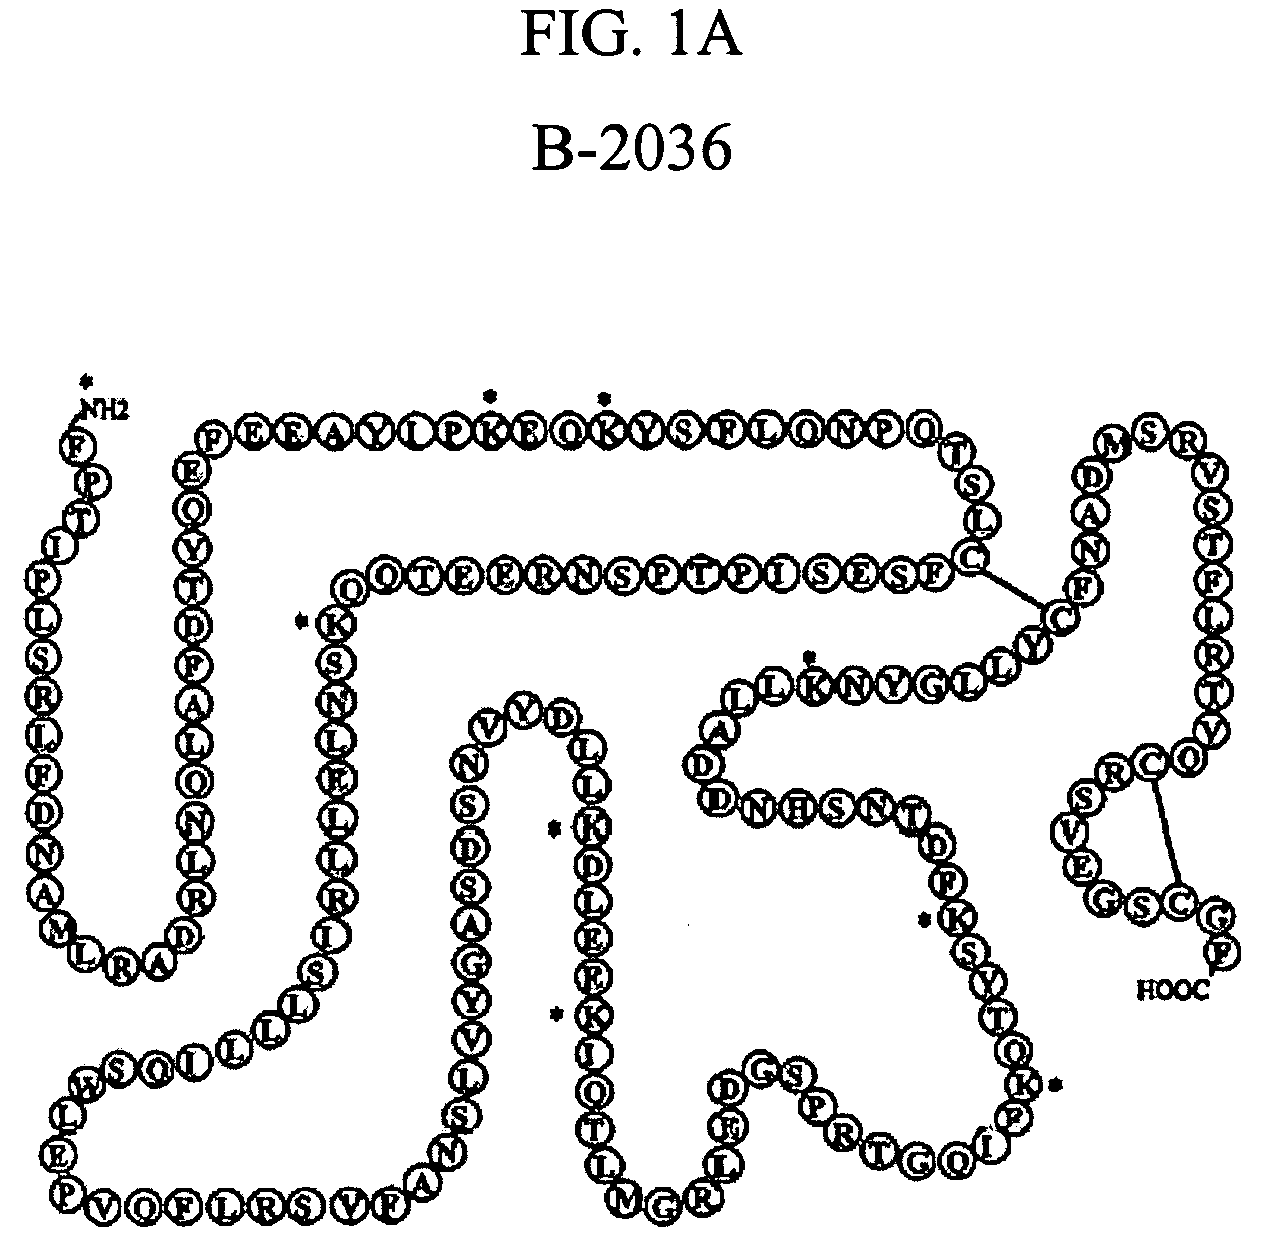 Process for decreasing aggregate levels of pegylated protein